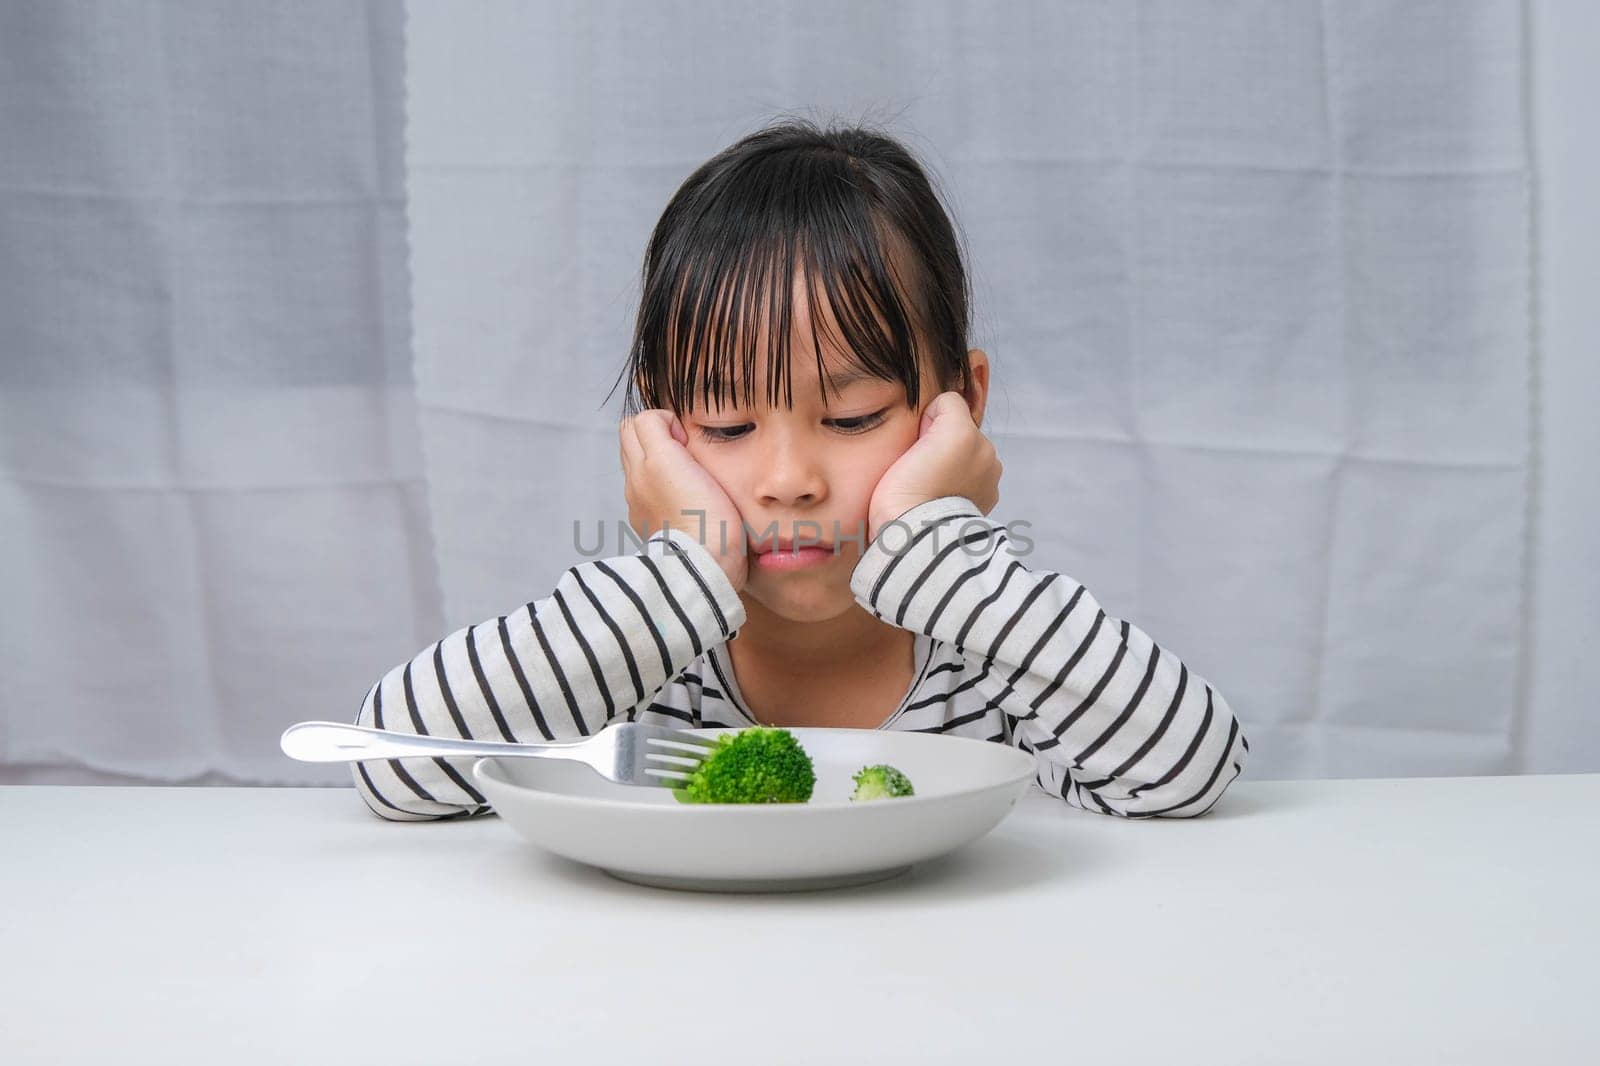 Children don't like to eat vegetables. Cute Asian girl refusing to eat healthy vegetables. Nutrition and healthy eating habits for children. by TEERASAK